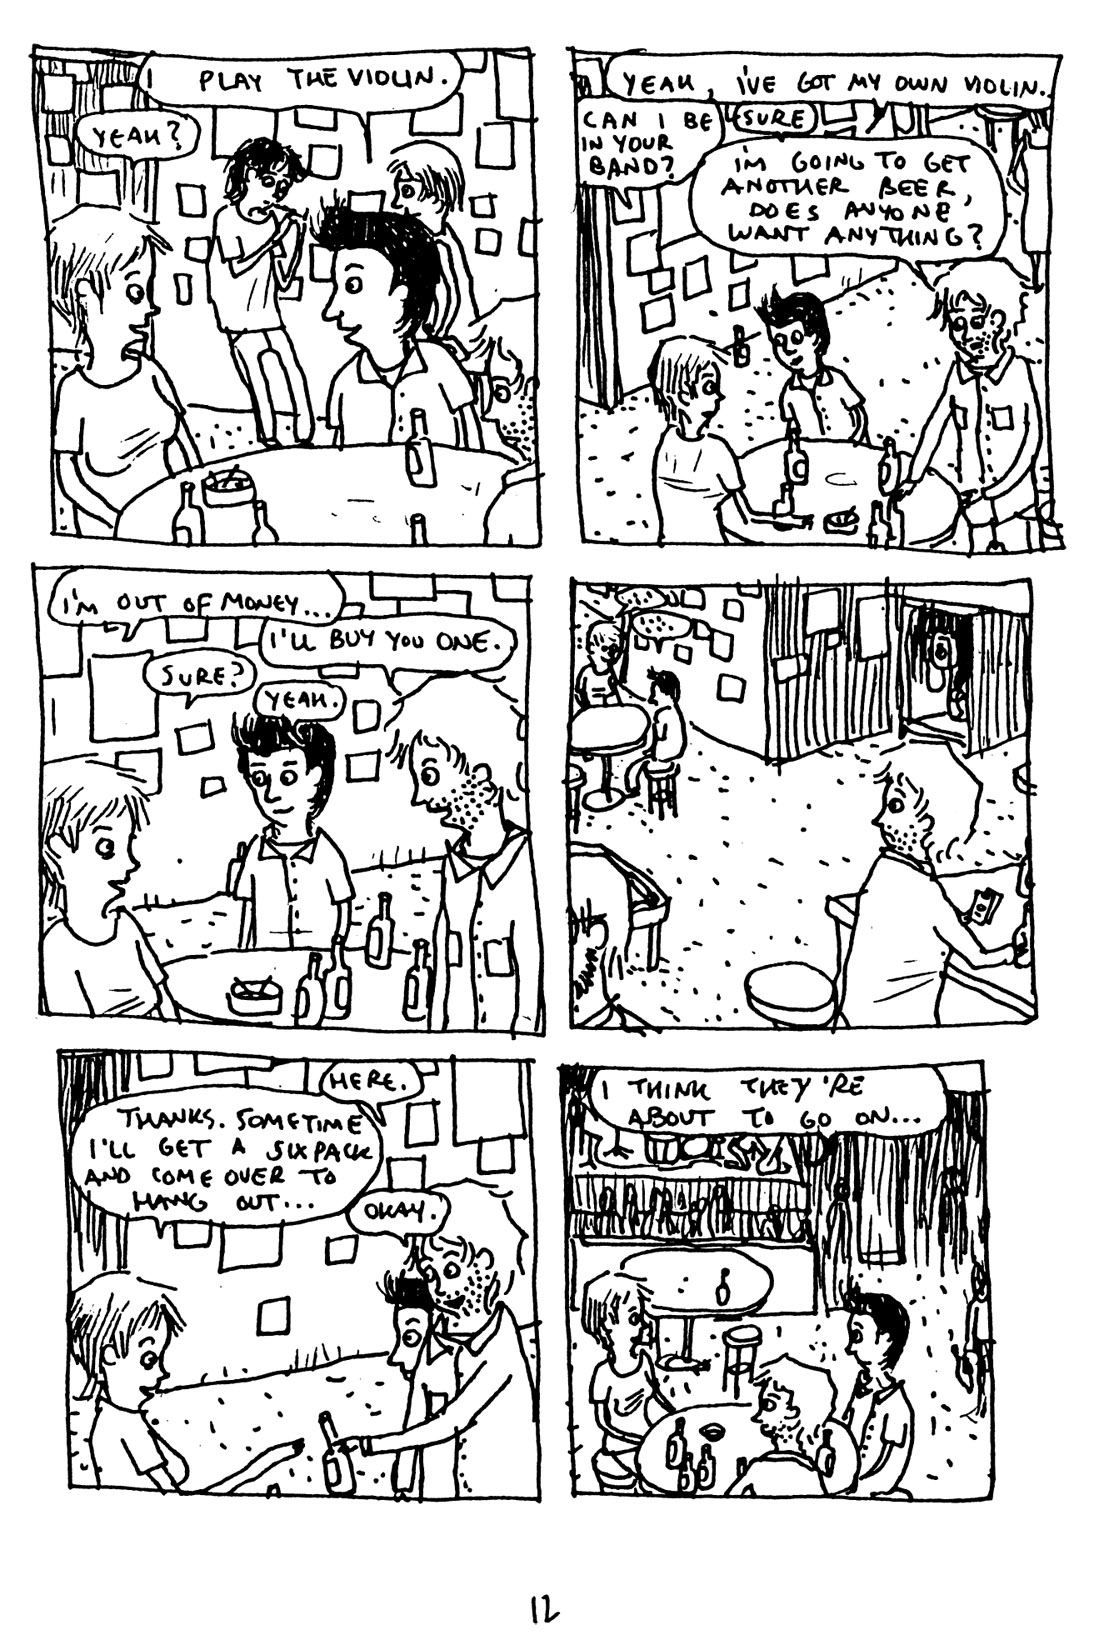 Read online Unlikely comic -  Issue # TPB (Part 1) - 21